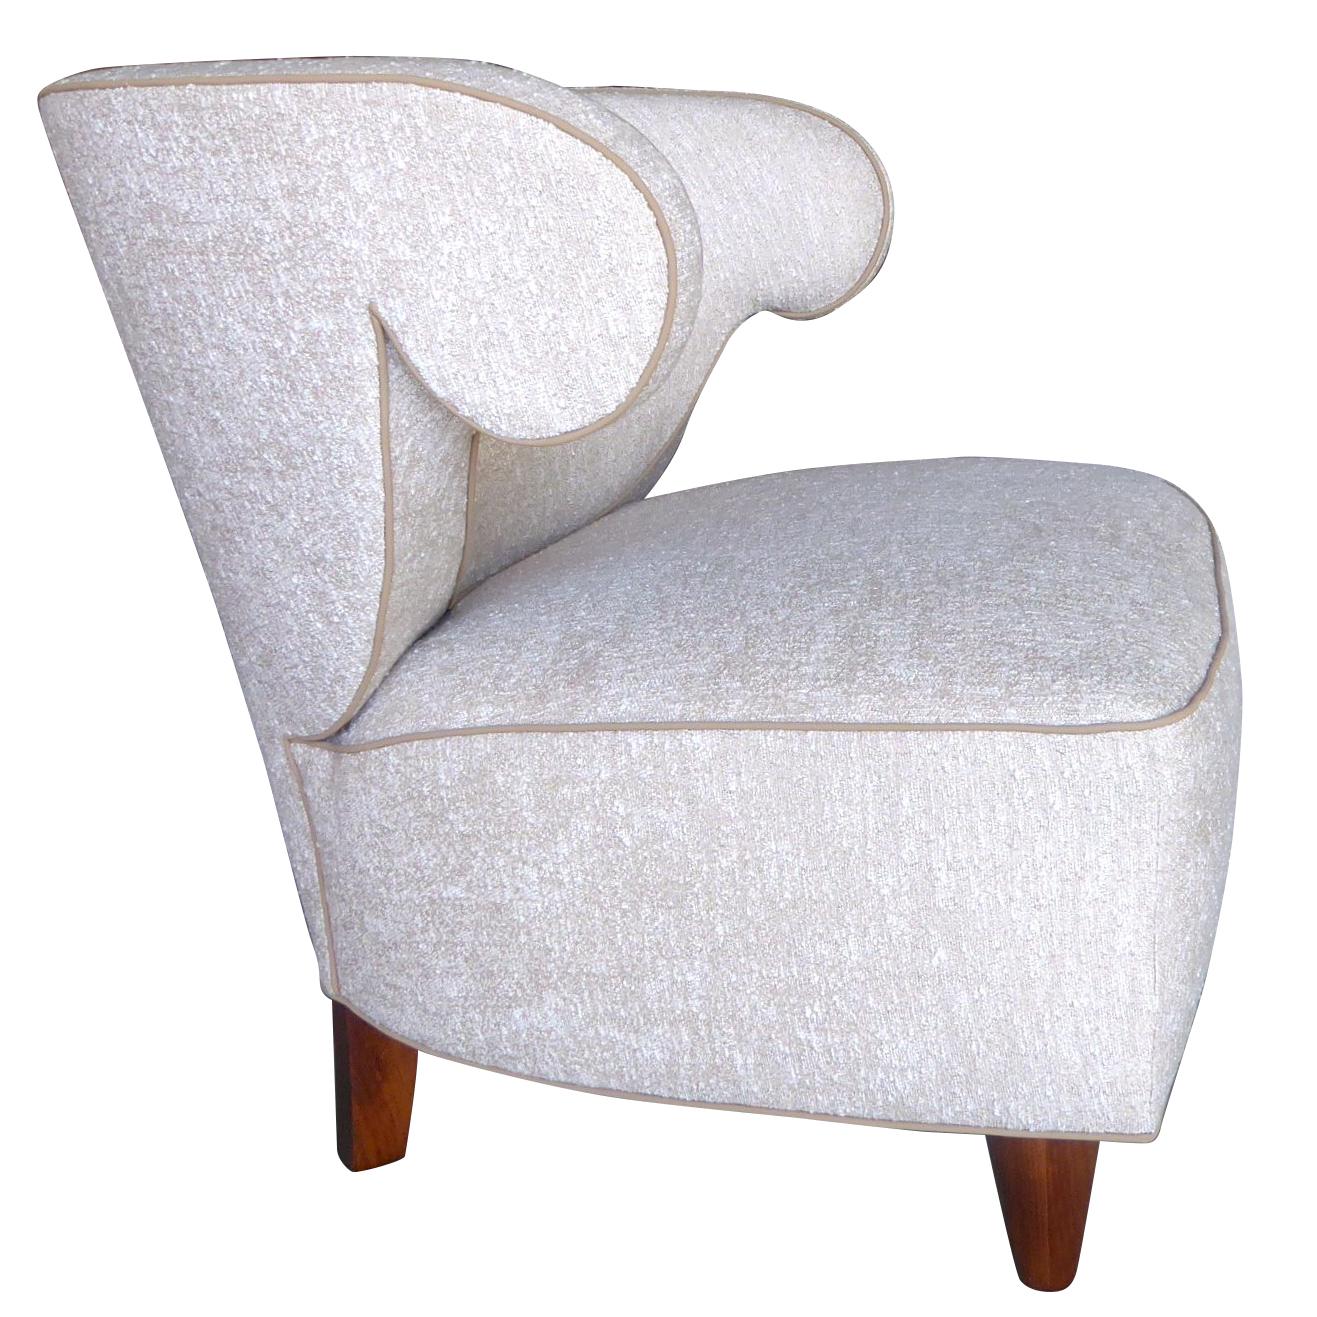 The Christopher Anthony Ltd. "Yvonne" Club Chair For Sale